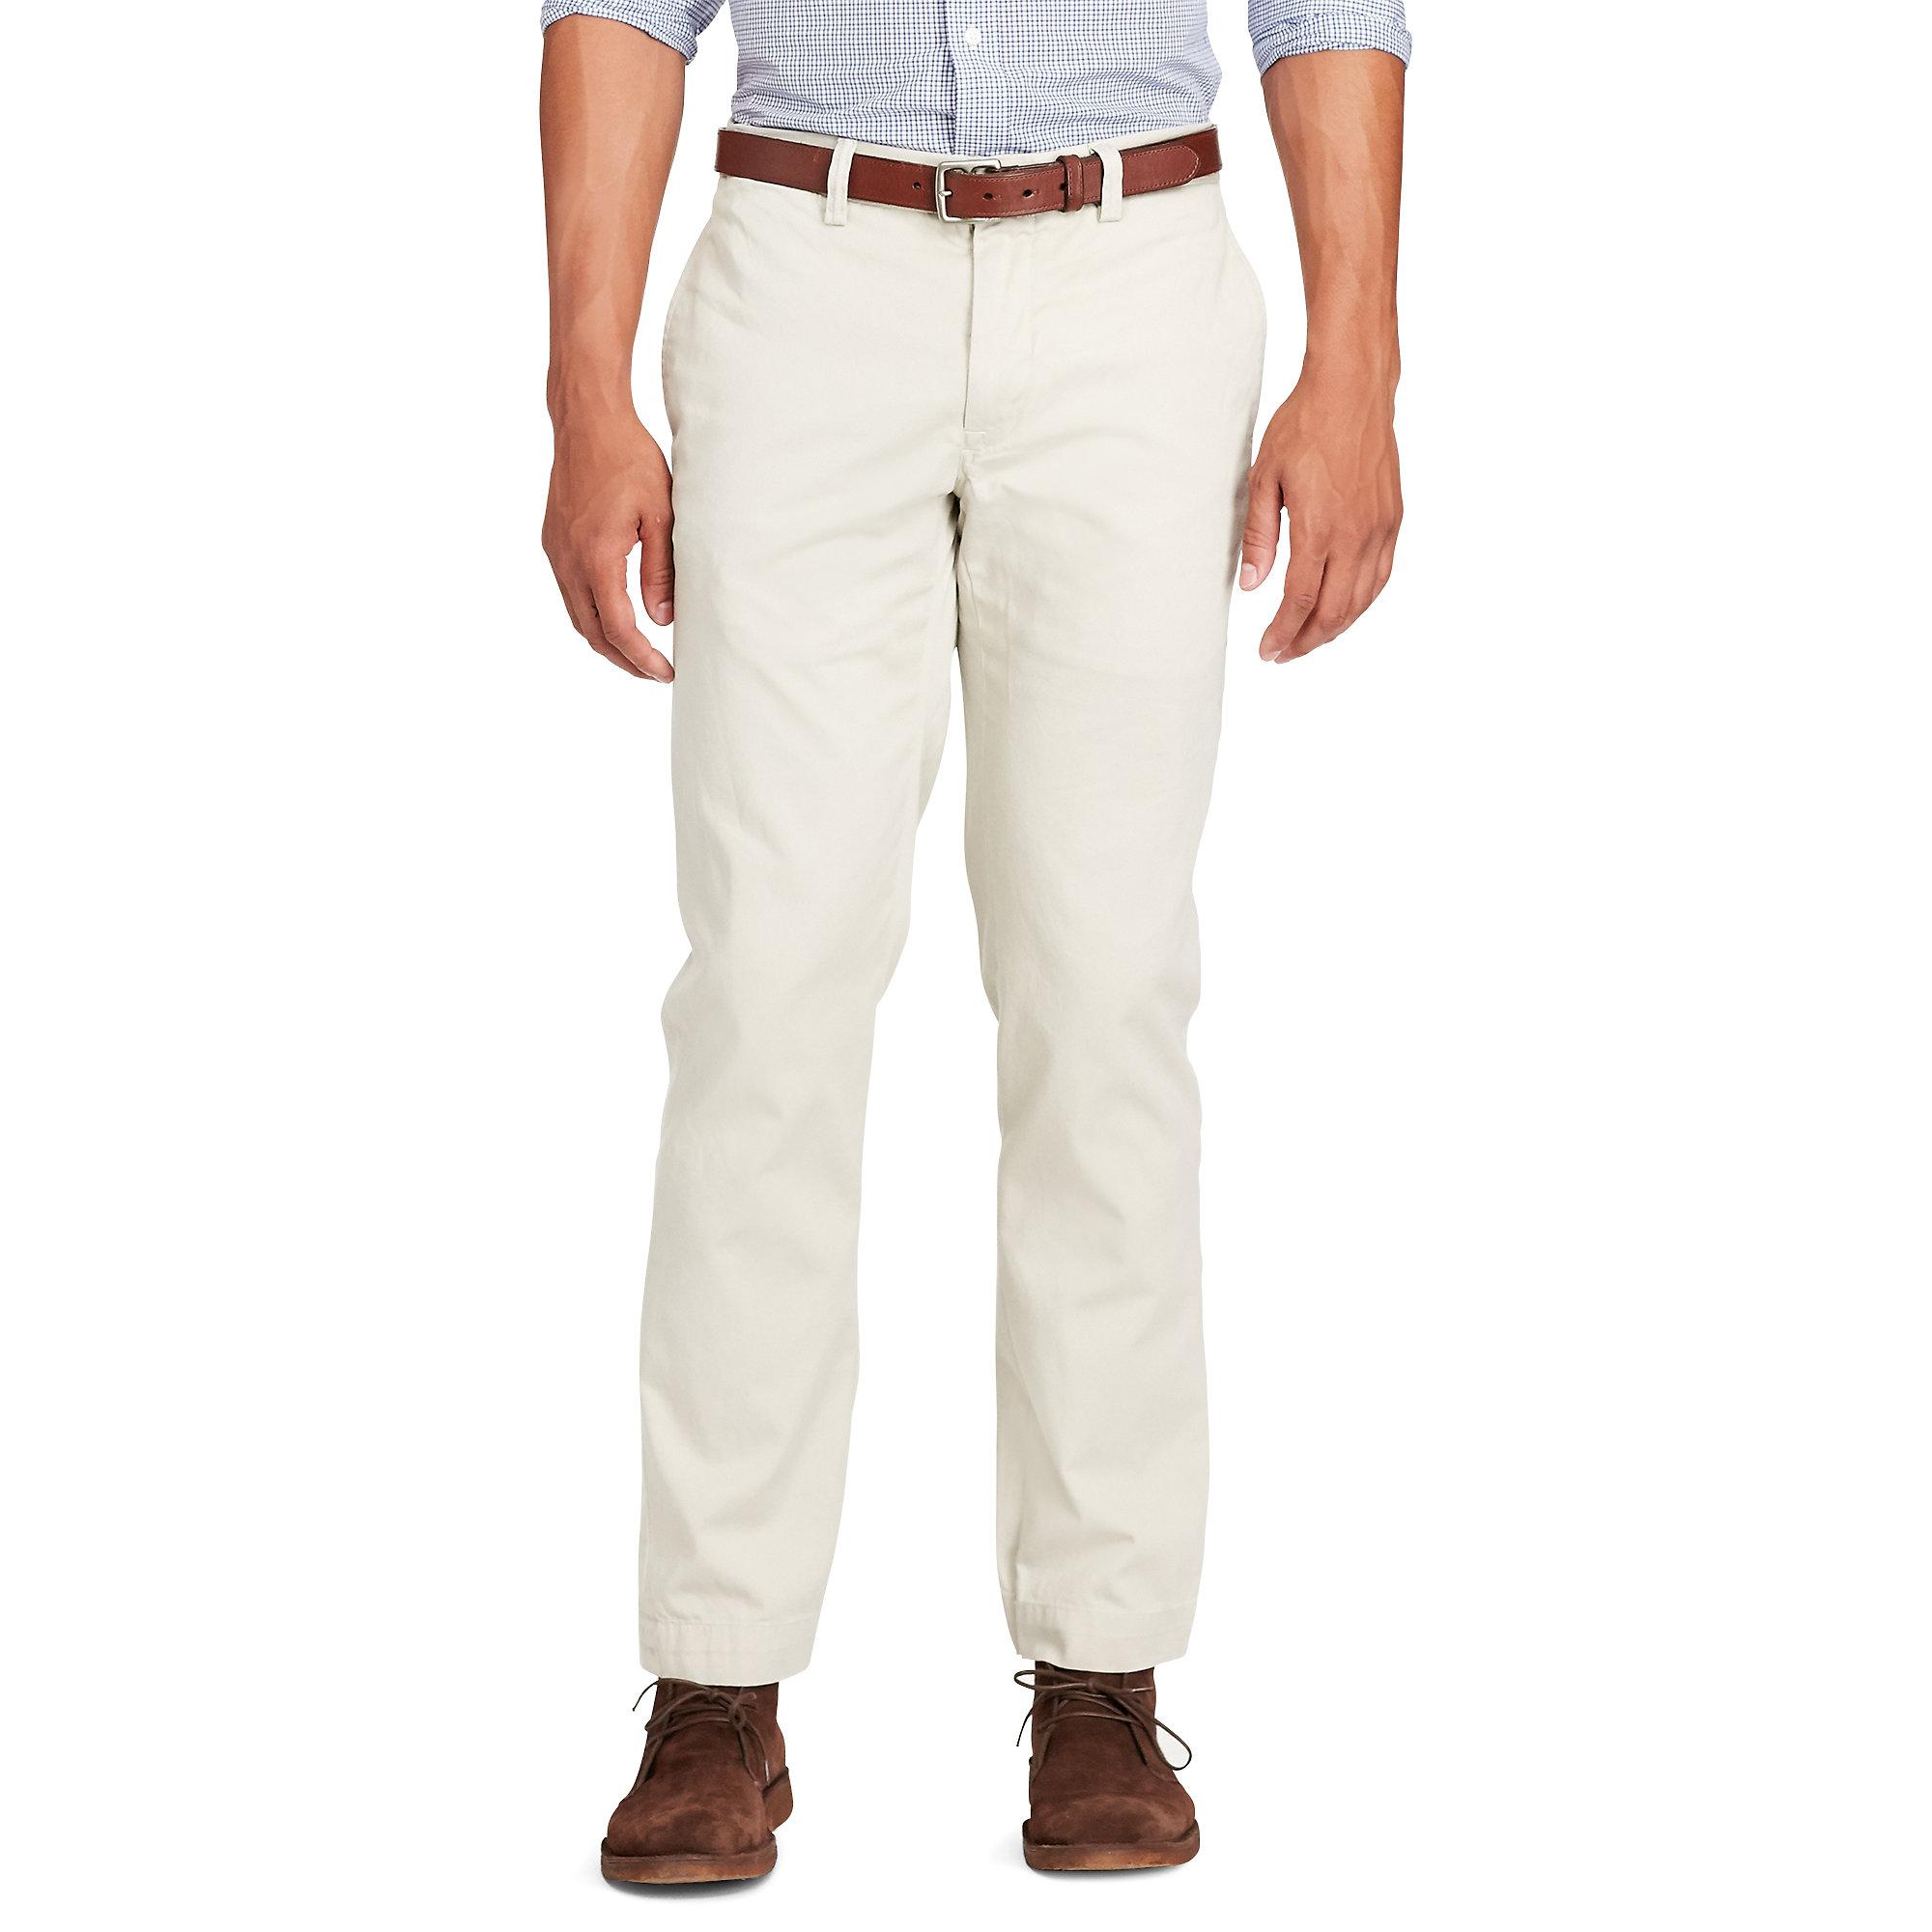 Polo ralph lauren Straight-fit Cotton Chino in Natural for Men - Save ...